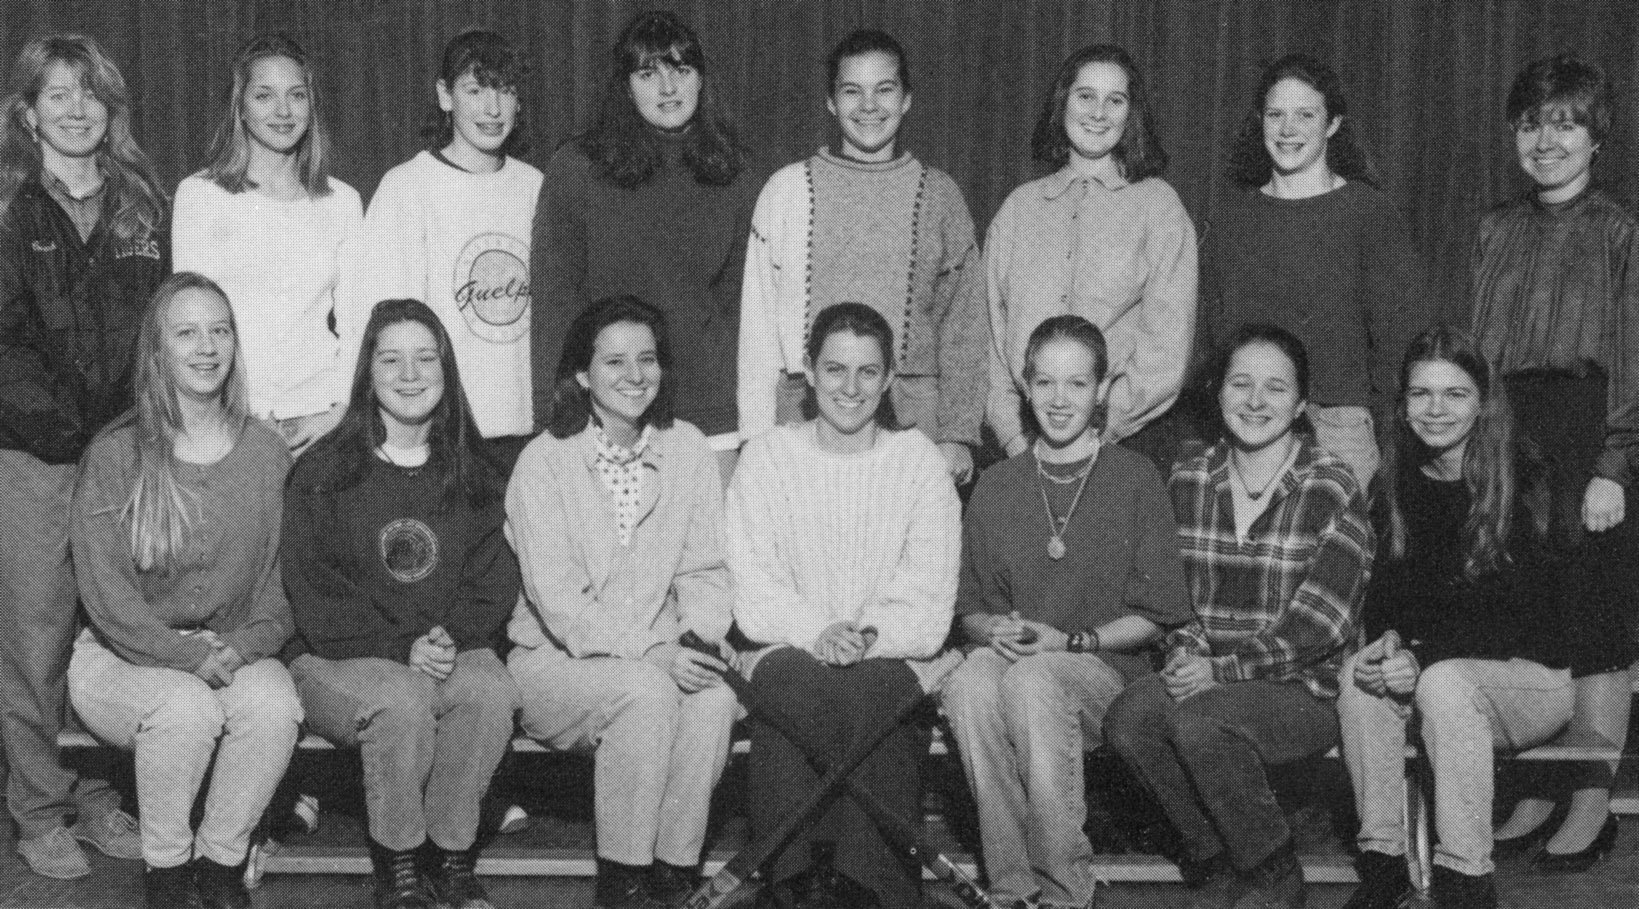 (Click to magnify) FRONT ROW: Niki Thornhill, May Tracey, Michelle Featherstone, Karen Simpson, Shannon Werner, Kathleen Carroll, Annabel Pearce; SECOND ROW: Mrs. Orschel, Judy Jacques, Sarah Kennedy, Laura Lee, Dana Dufton, Beverly Cornish, Maggie Evans,